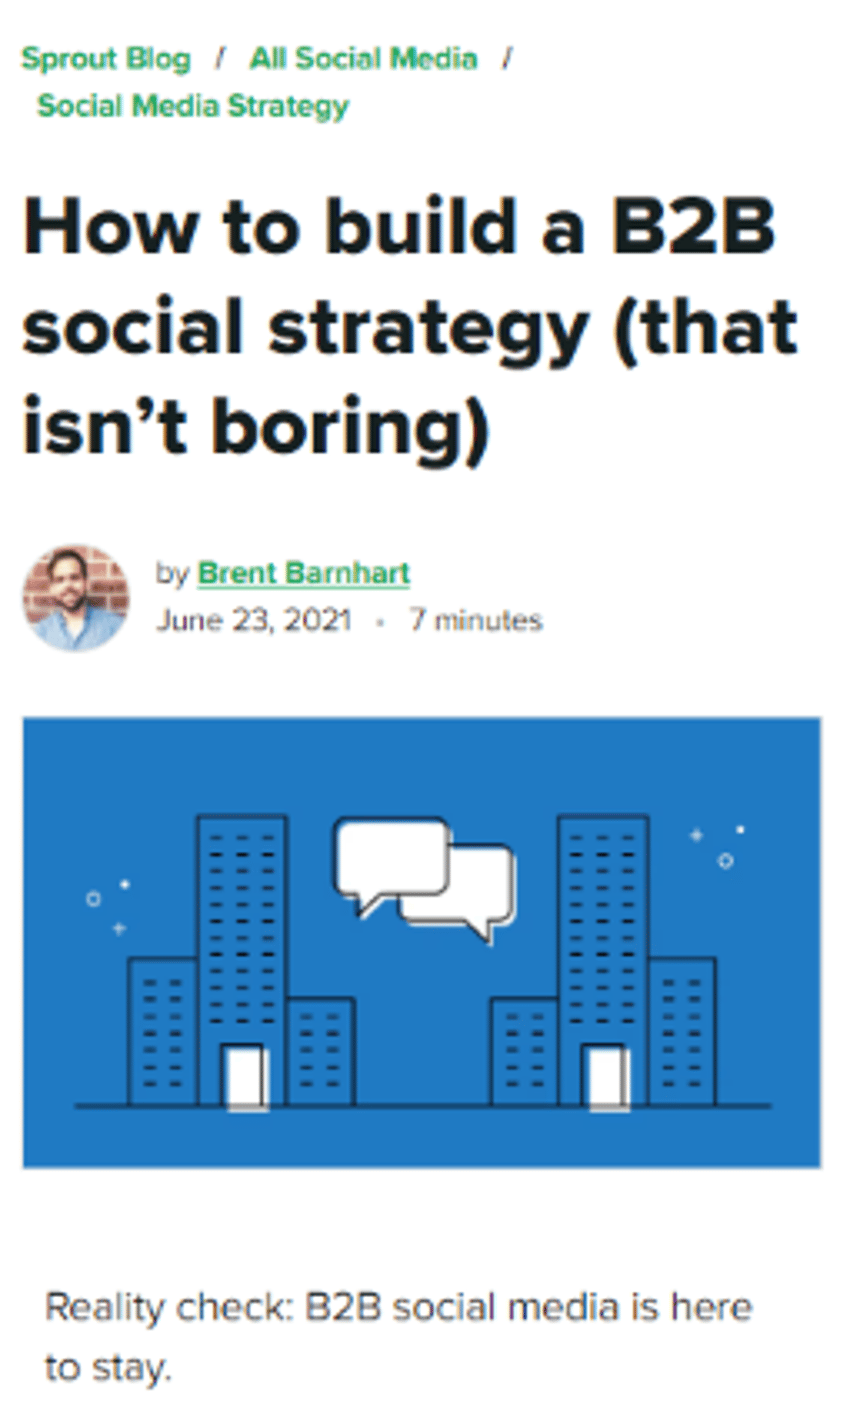 check out the full post [here](https://sproutsocial.com/insights/b2b-social-media-strategy/)